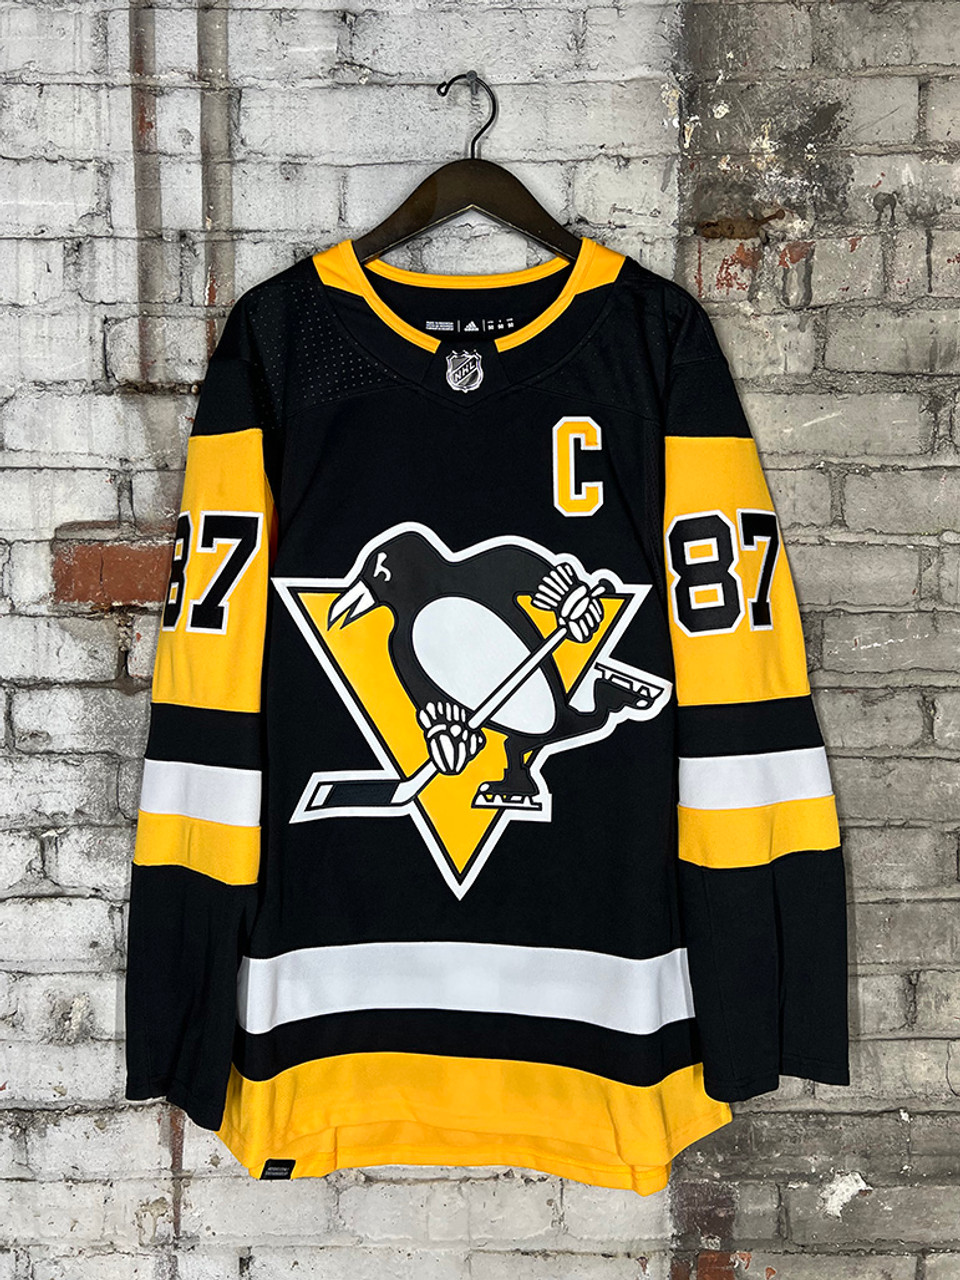 ANY NAME AND NUMBER PITTSBURGH PENGUINS THIRD AUTHENTIC ADIDAS NHL